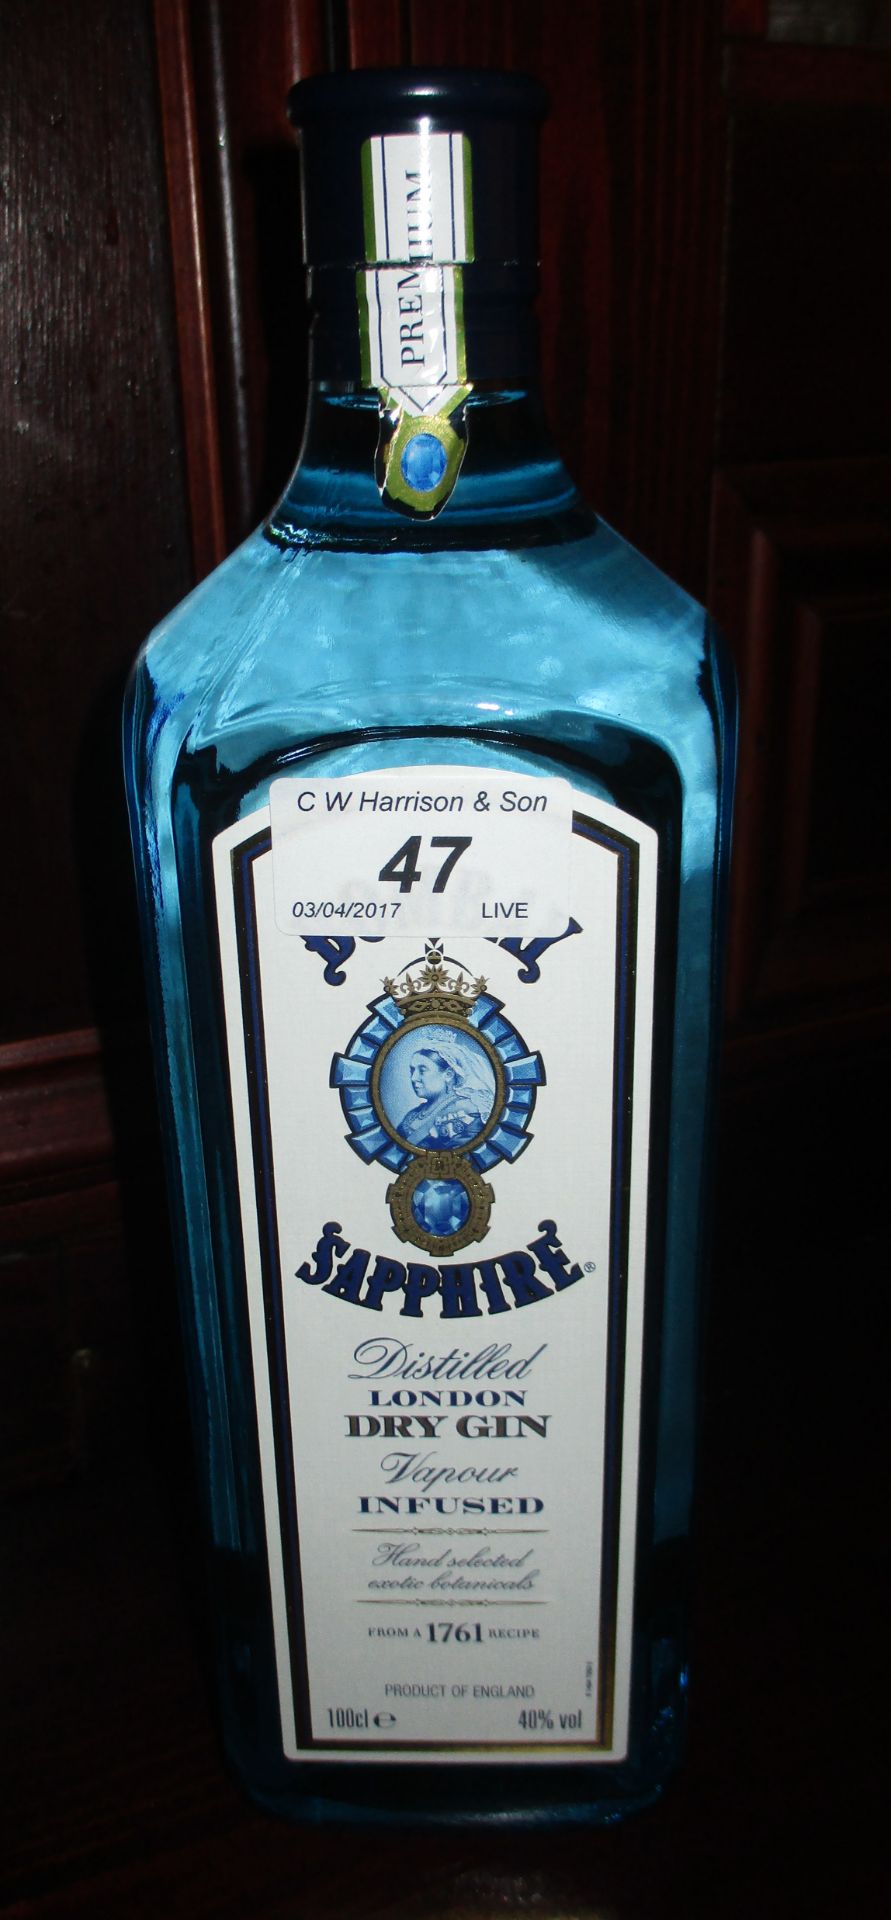 100cl bottle of Bombay Sapphire London Dry Gin.